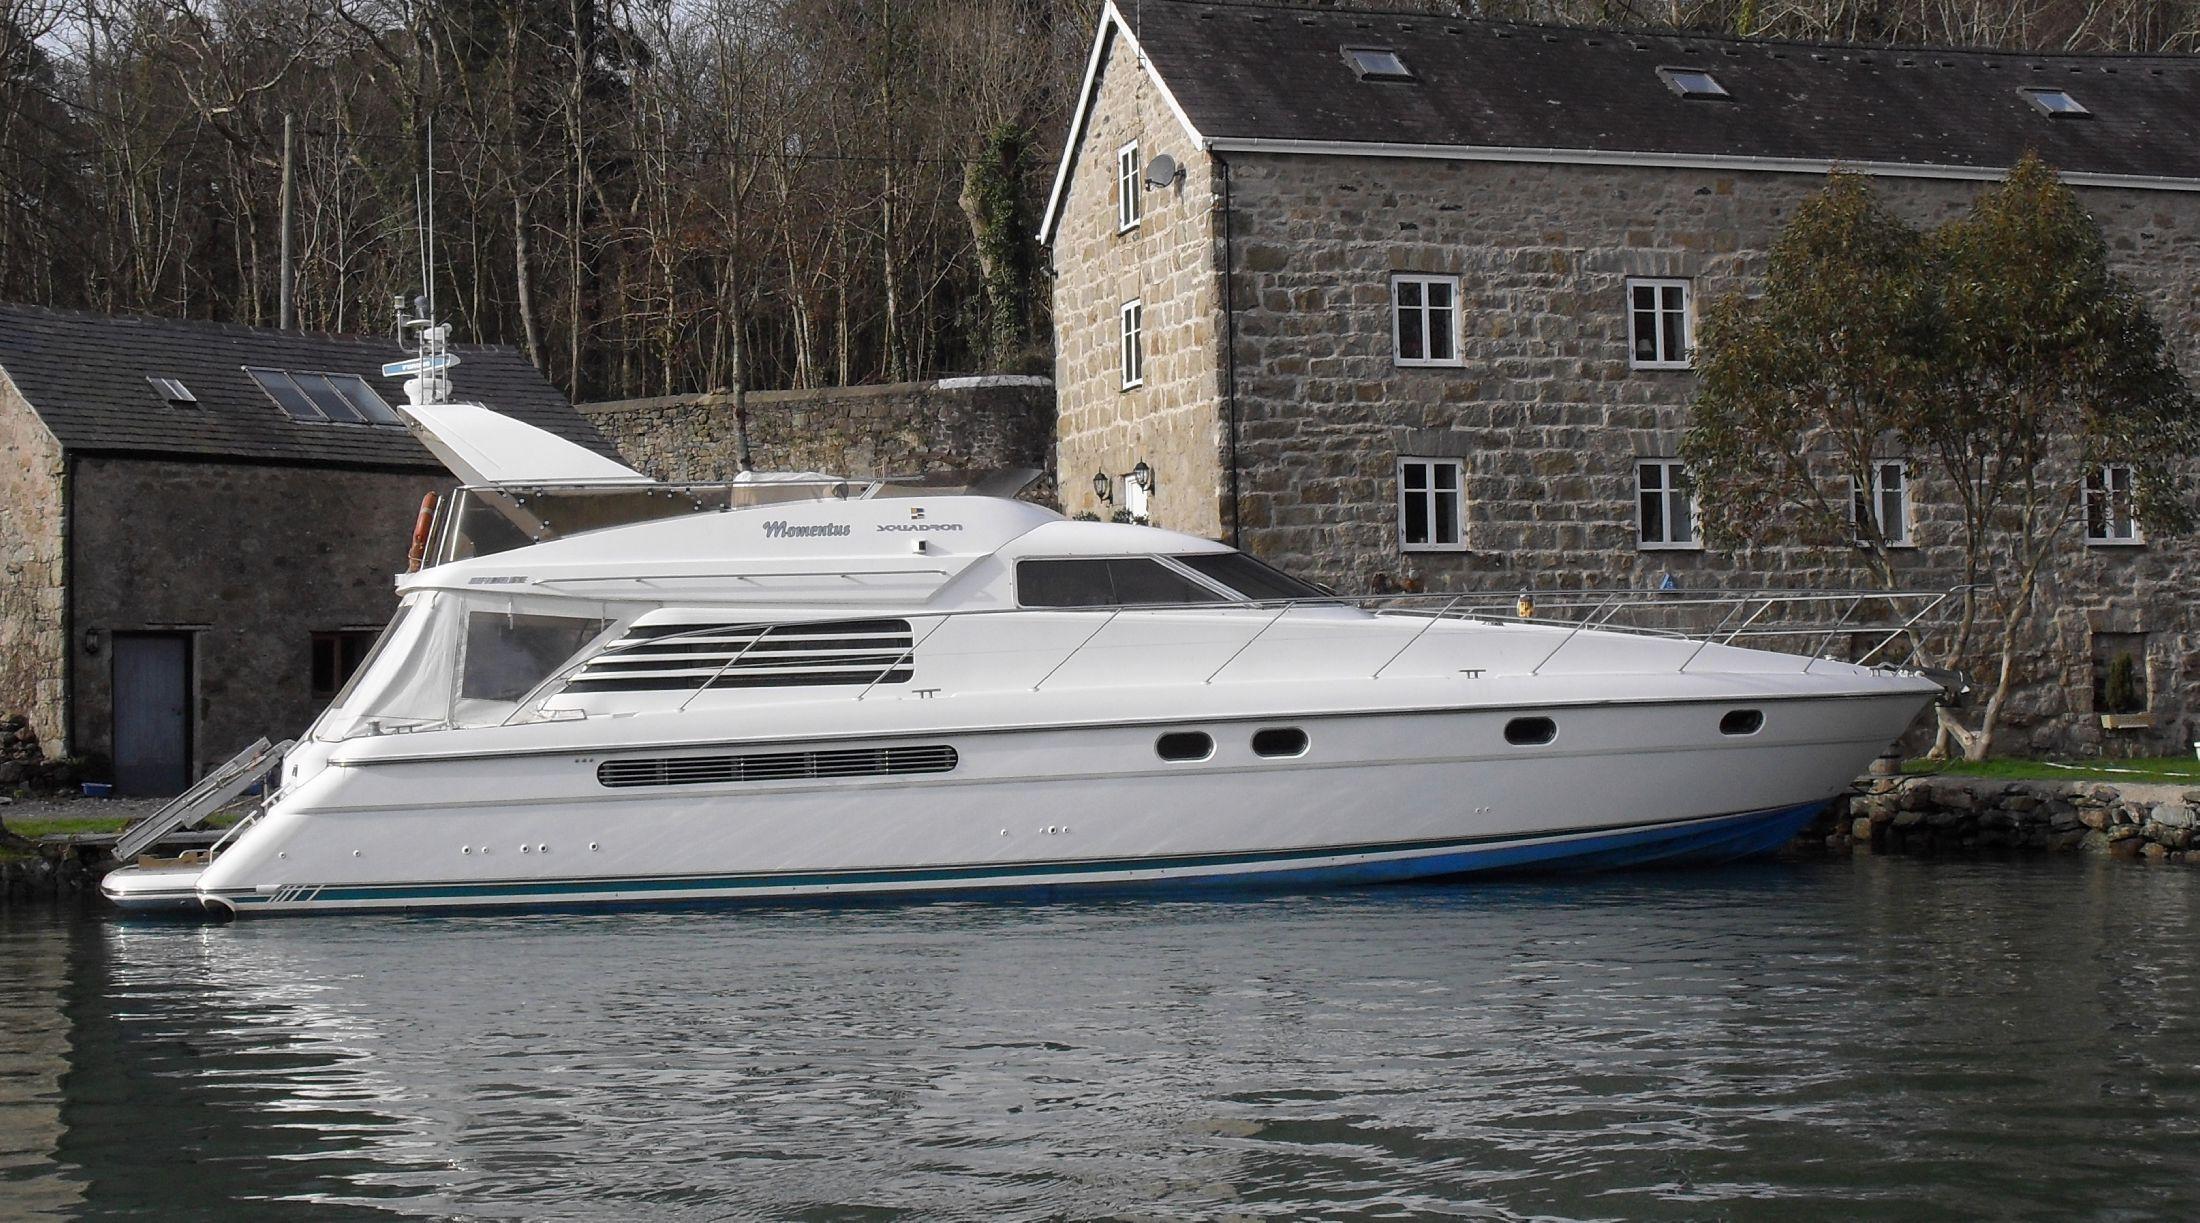 Fairline Squadron 59, Isle of Anglesey